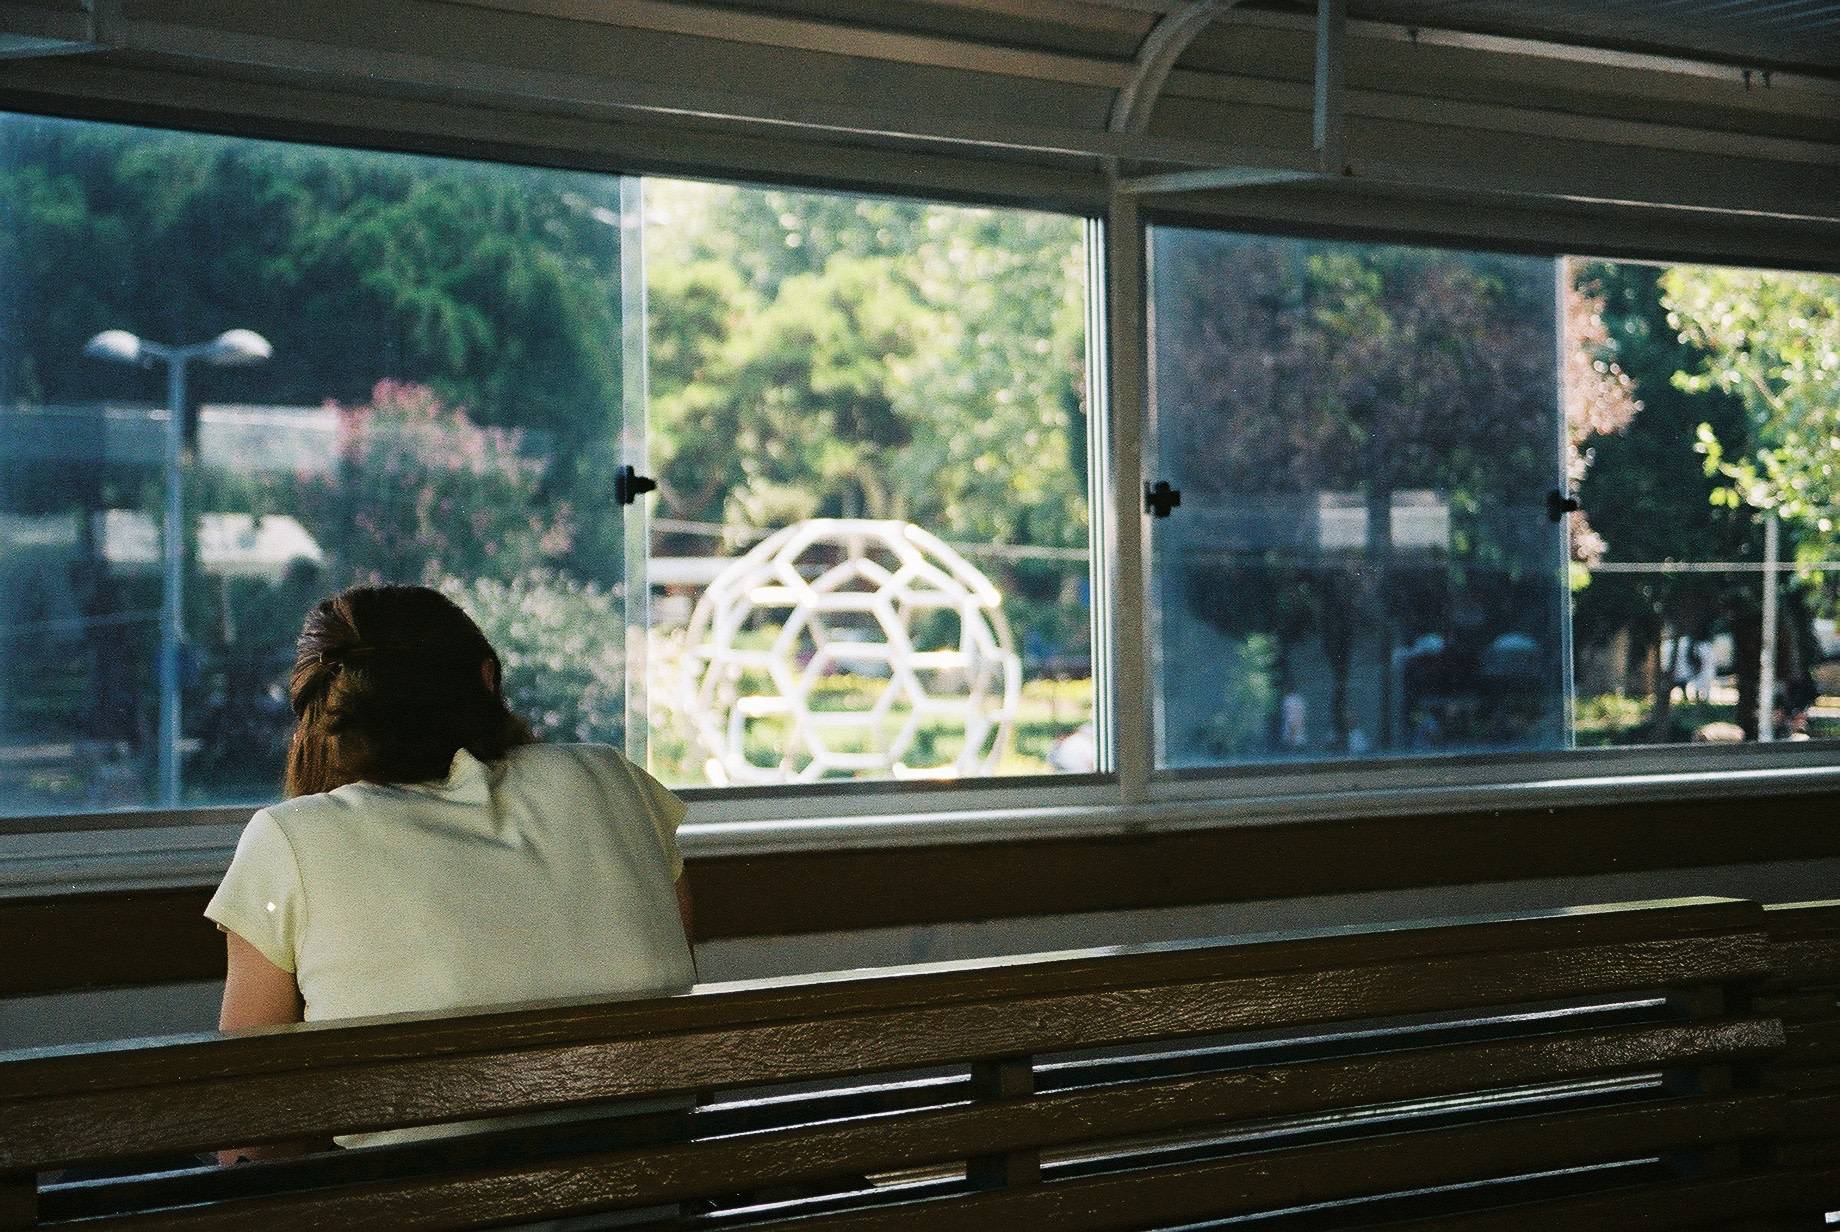 person sitting on a wooden bench seen from behind, spherical metal statue on the background seen through the window